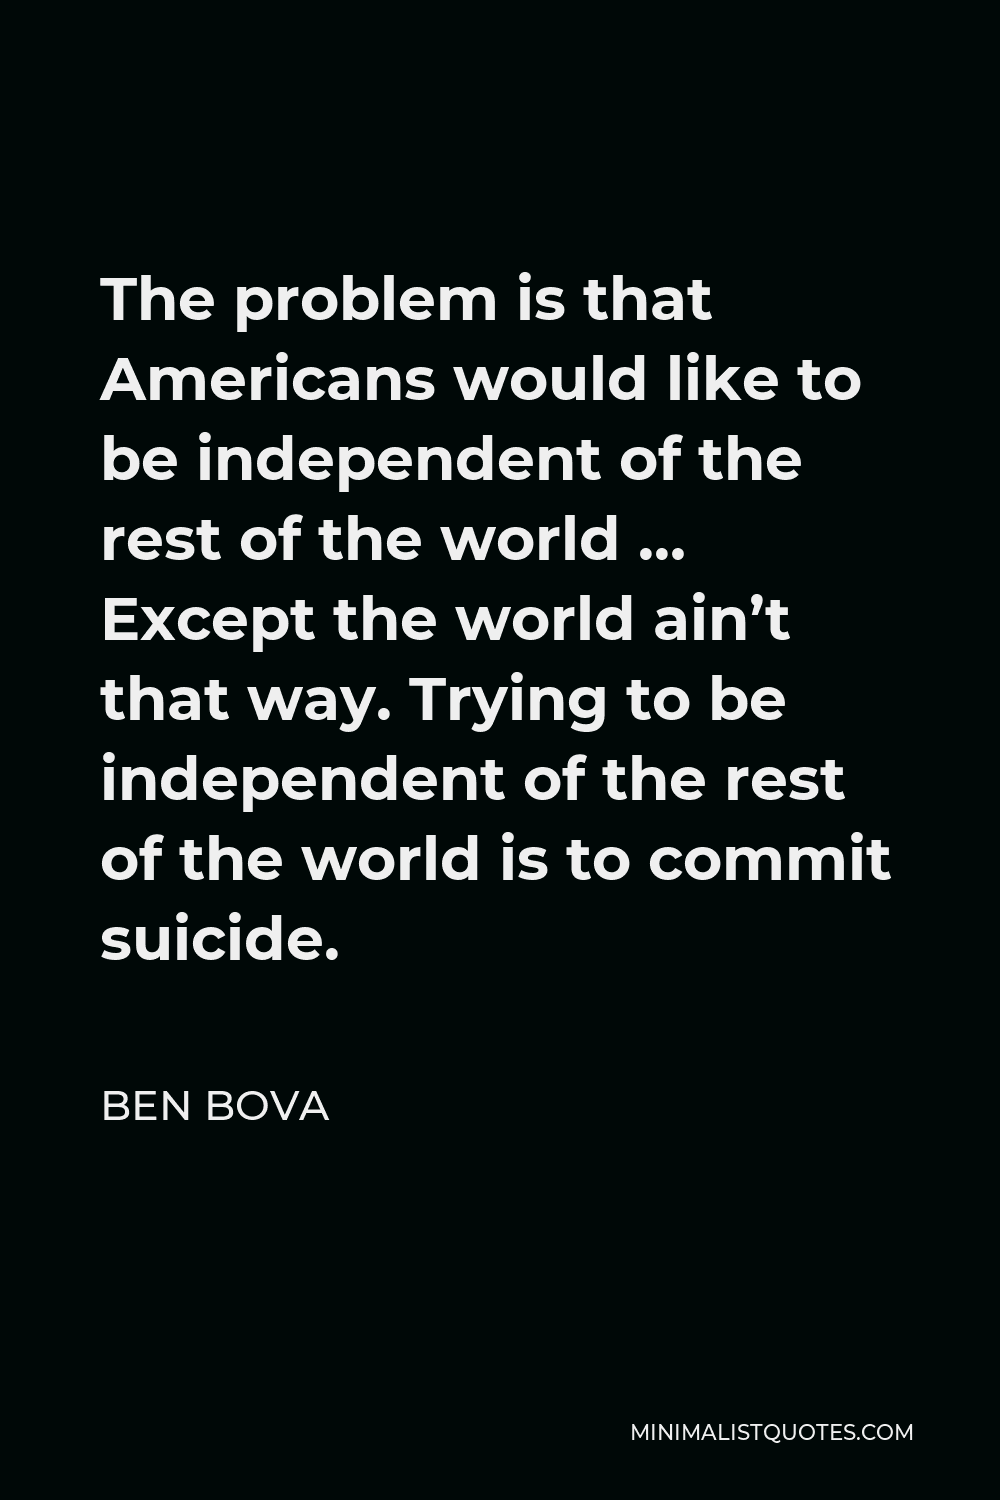 Ben Bova Quote - The problem is that Americans would like to be independent of the rest of the world … Except the world ain’t that way. Trying to be independent of the rest of the world is to commit suicide.